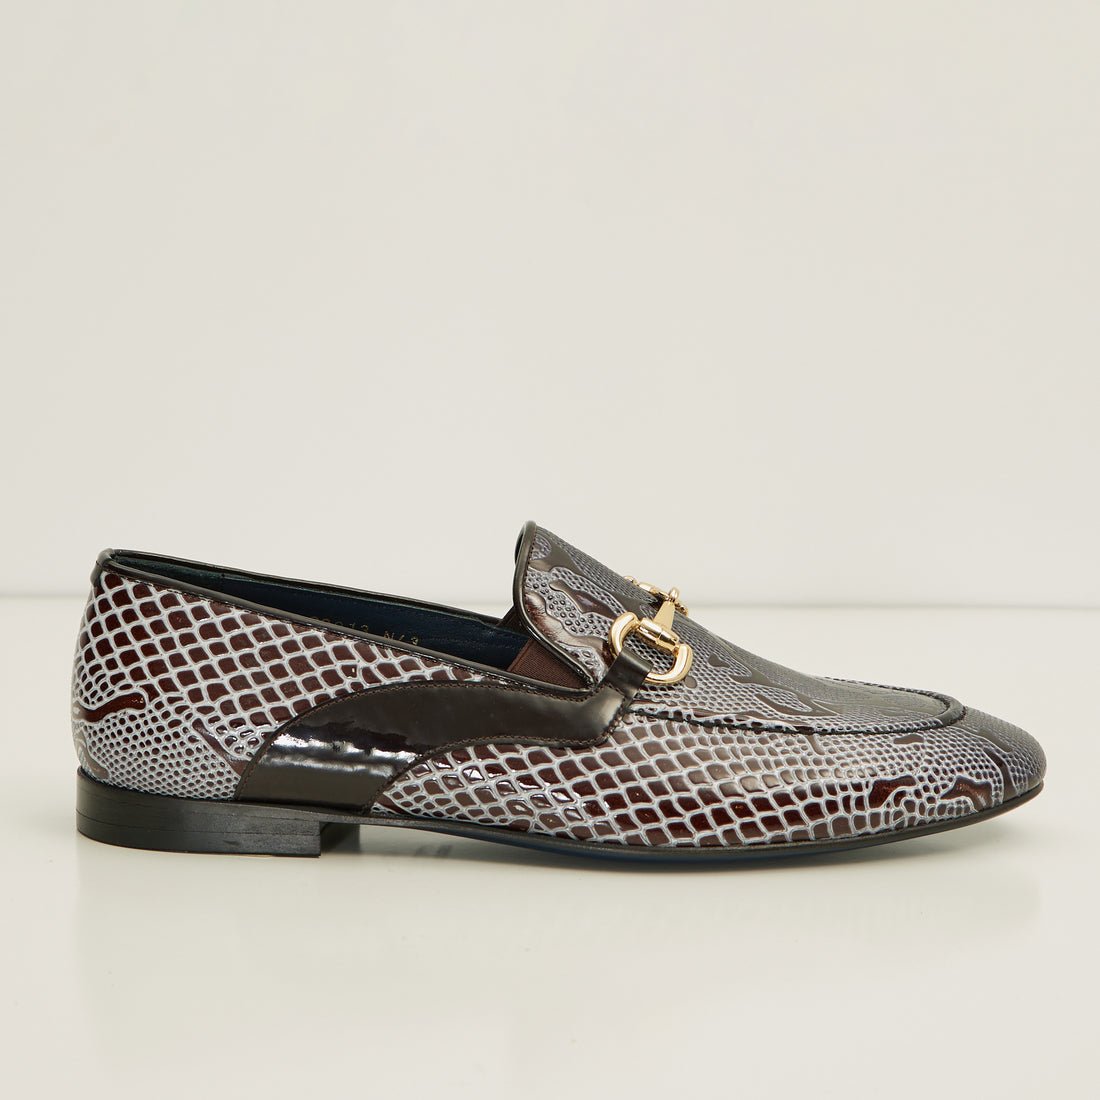 N° C9013X SNAKE EMBOSSED LEATHER AND GOLD METAL BIT LOAFER - BROWN BEIGE